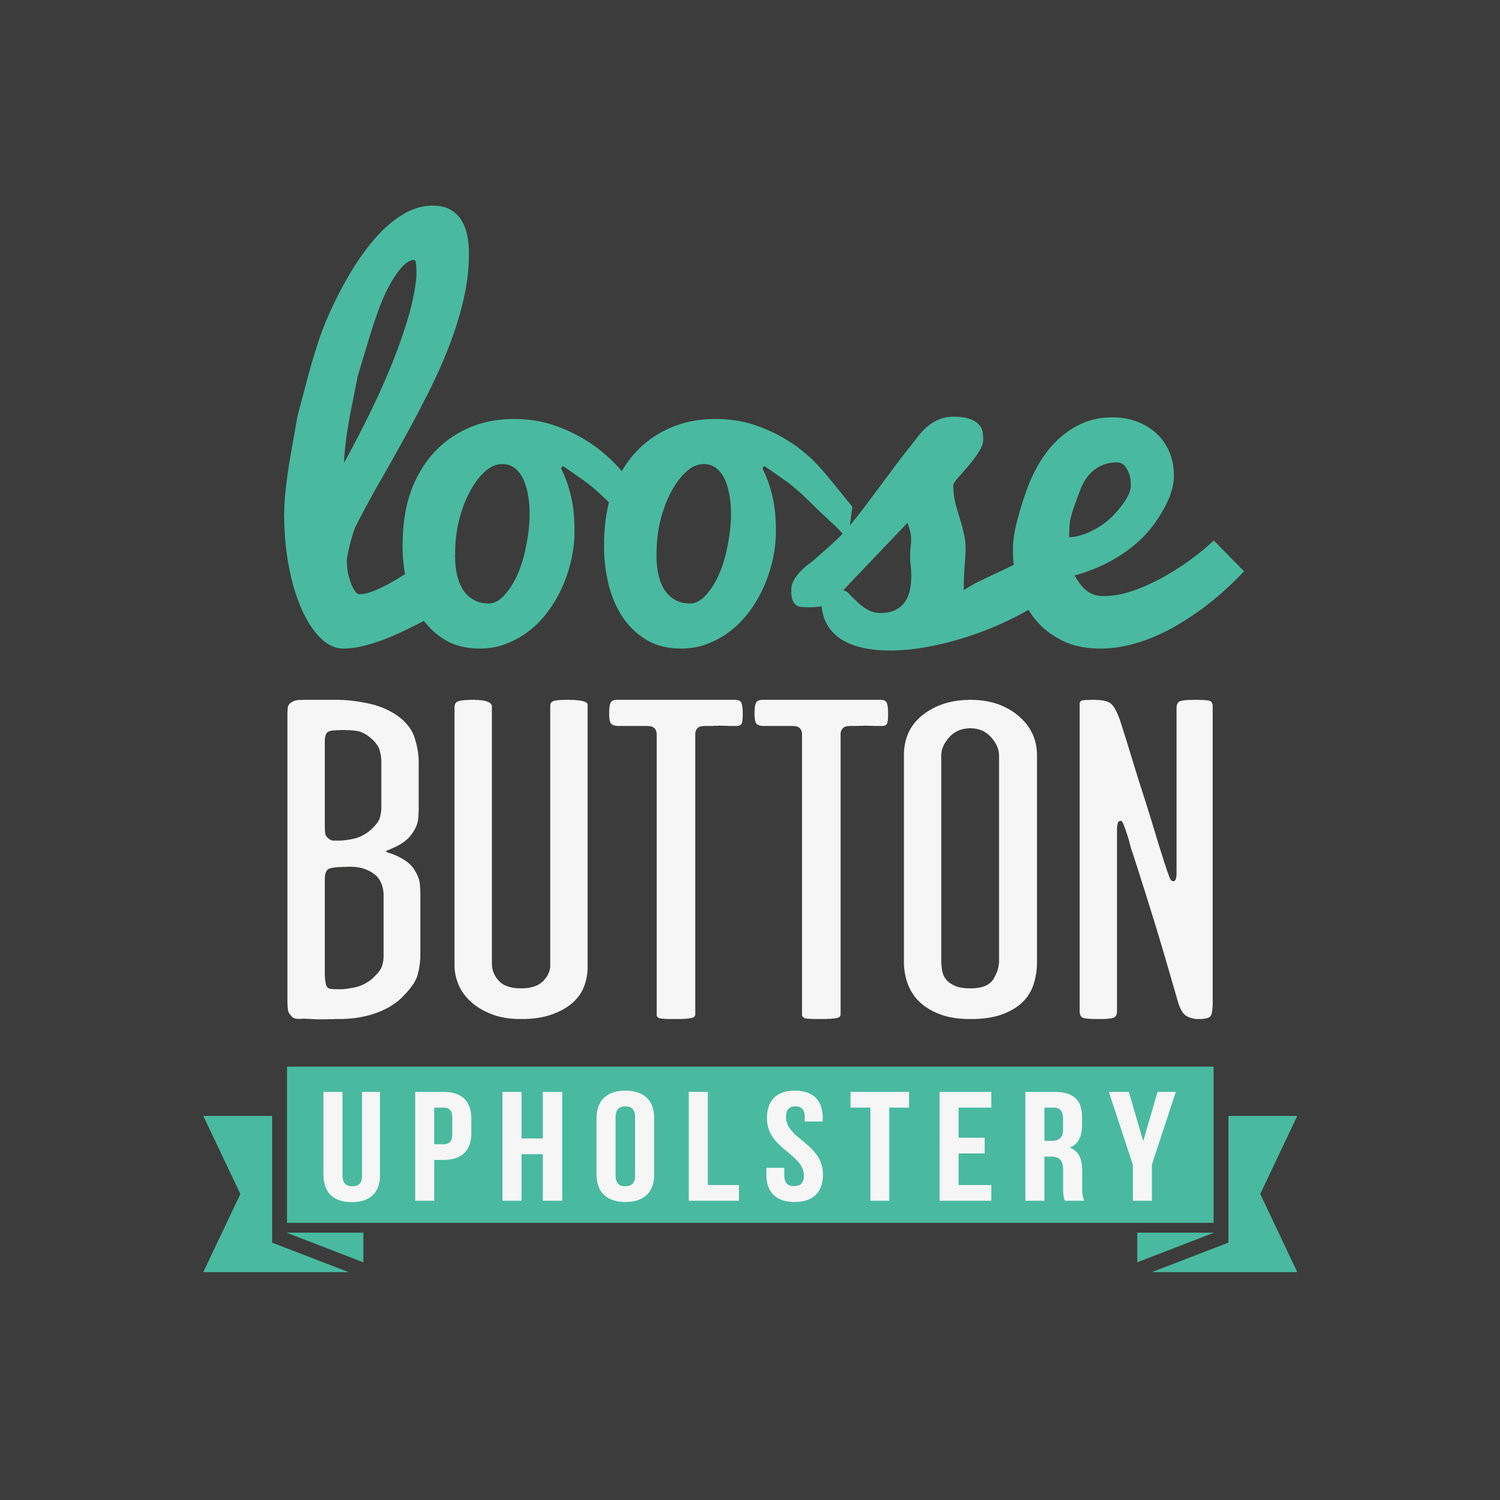 Custom Made Furniture Manchester | Loose Button Upholstery 